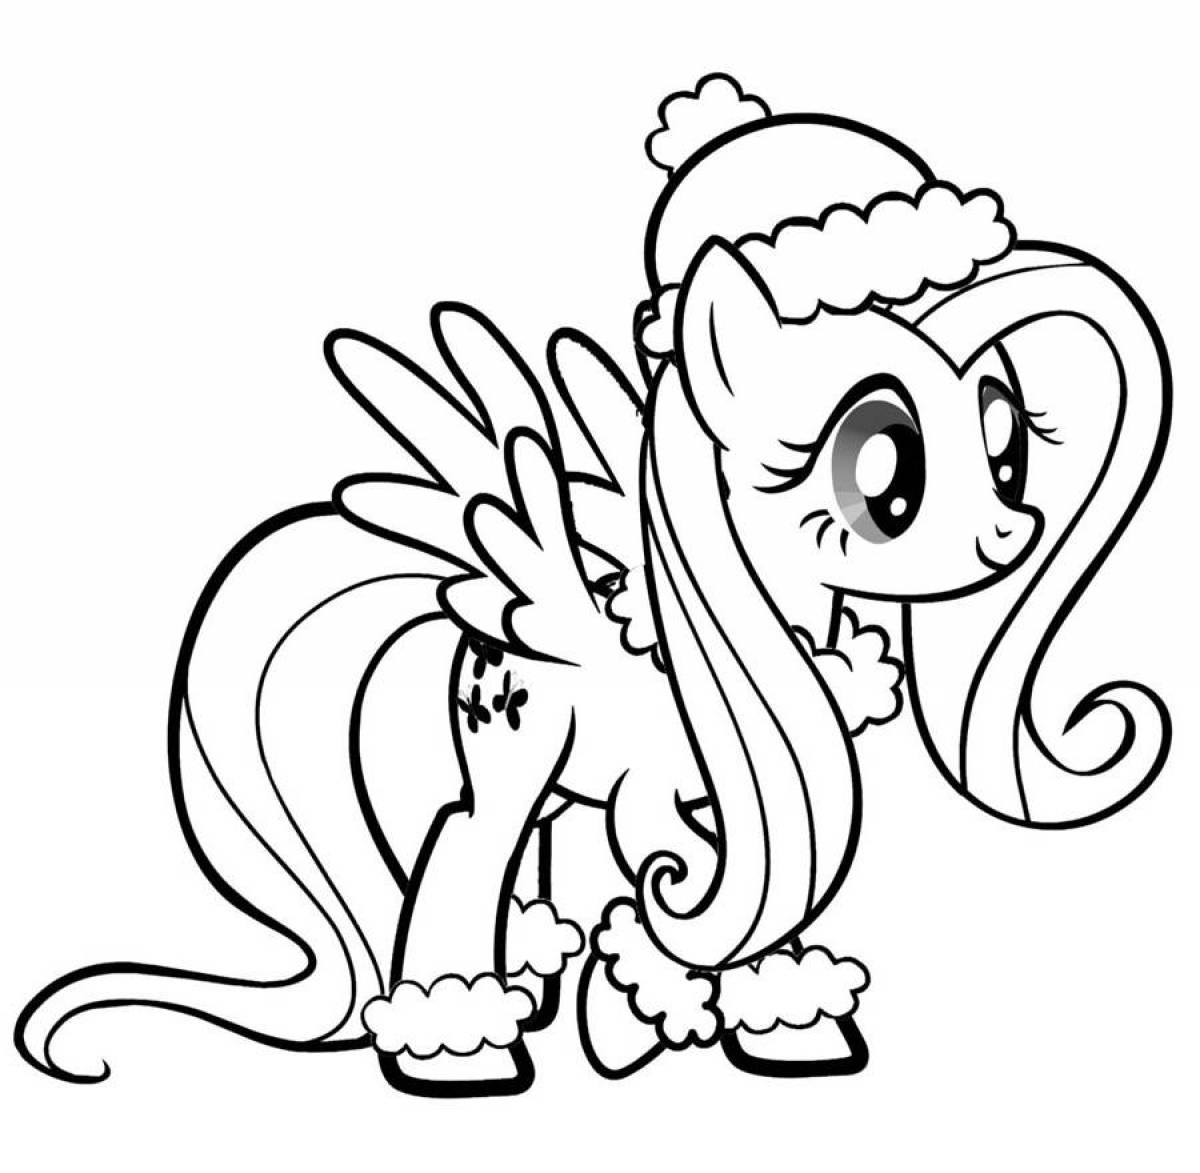 Vibrant pony coloring pages